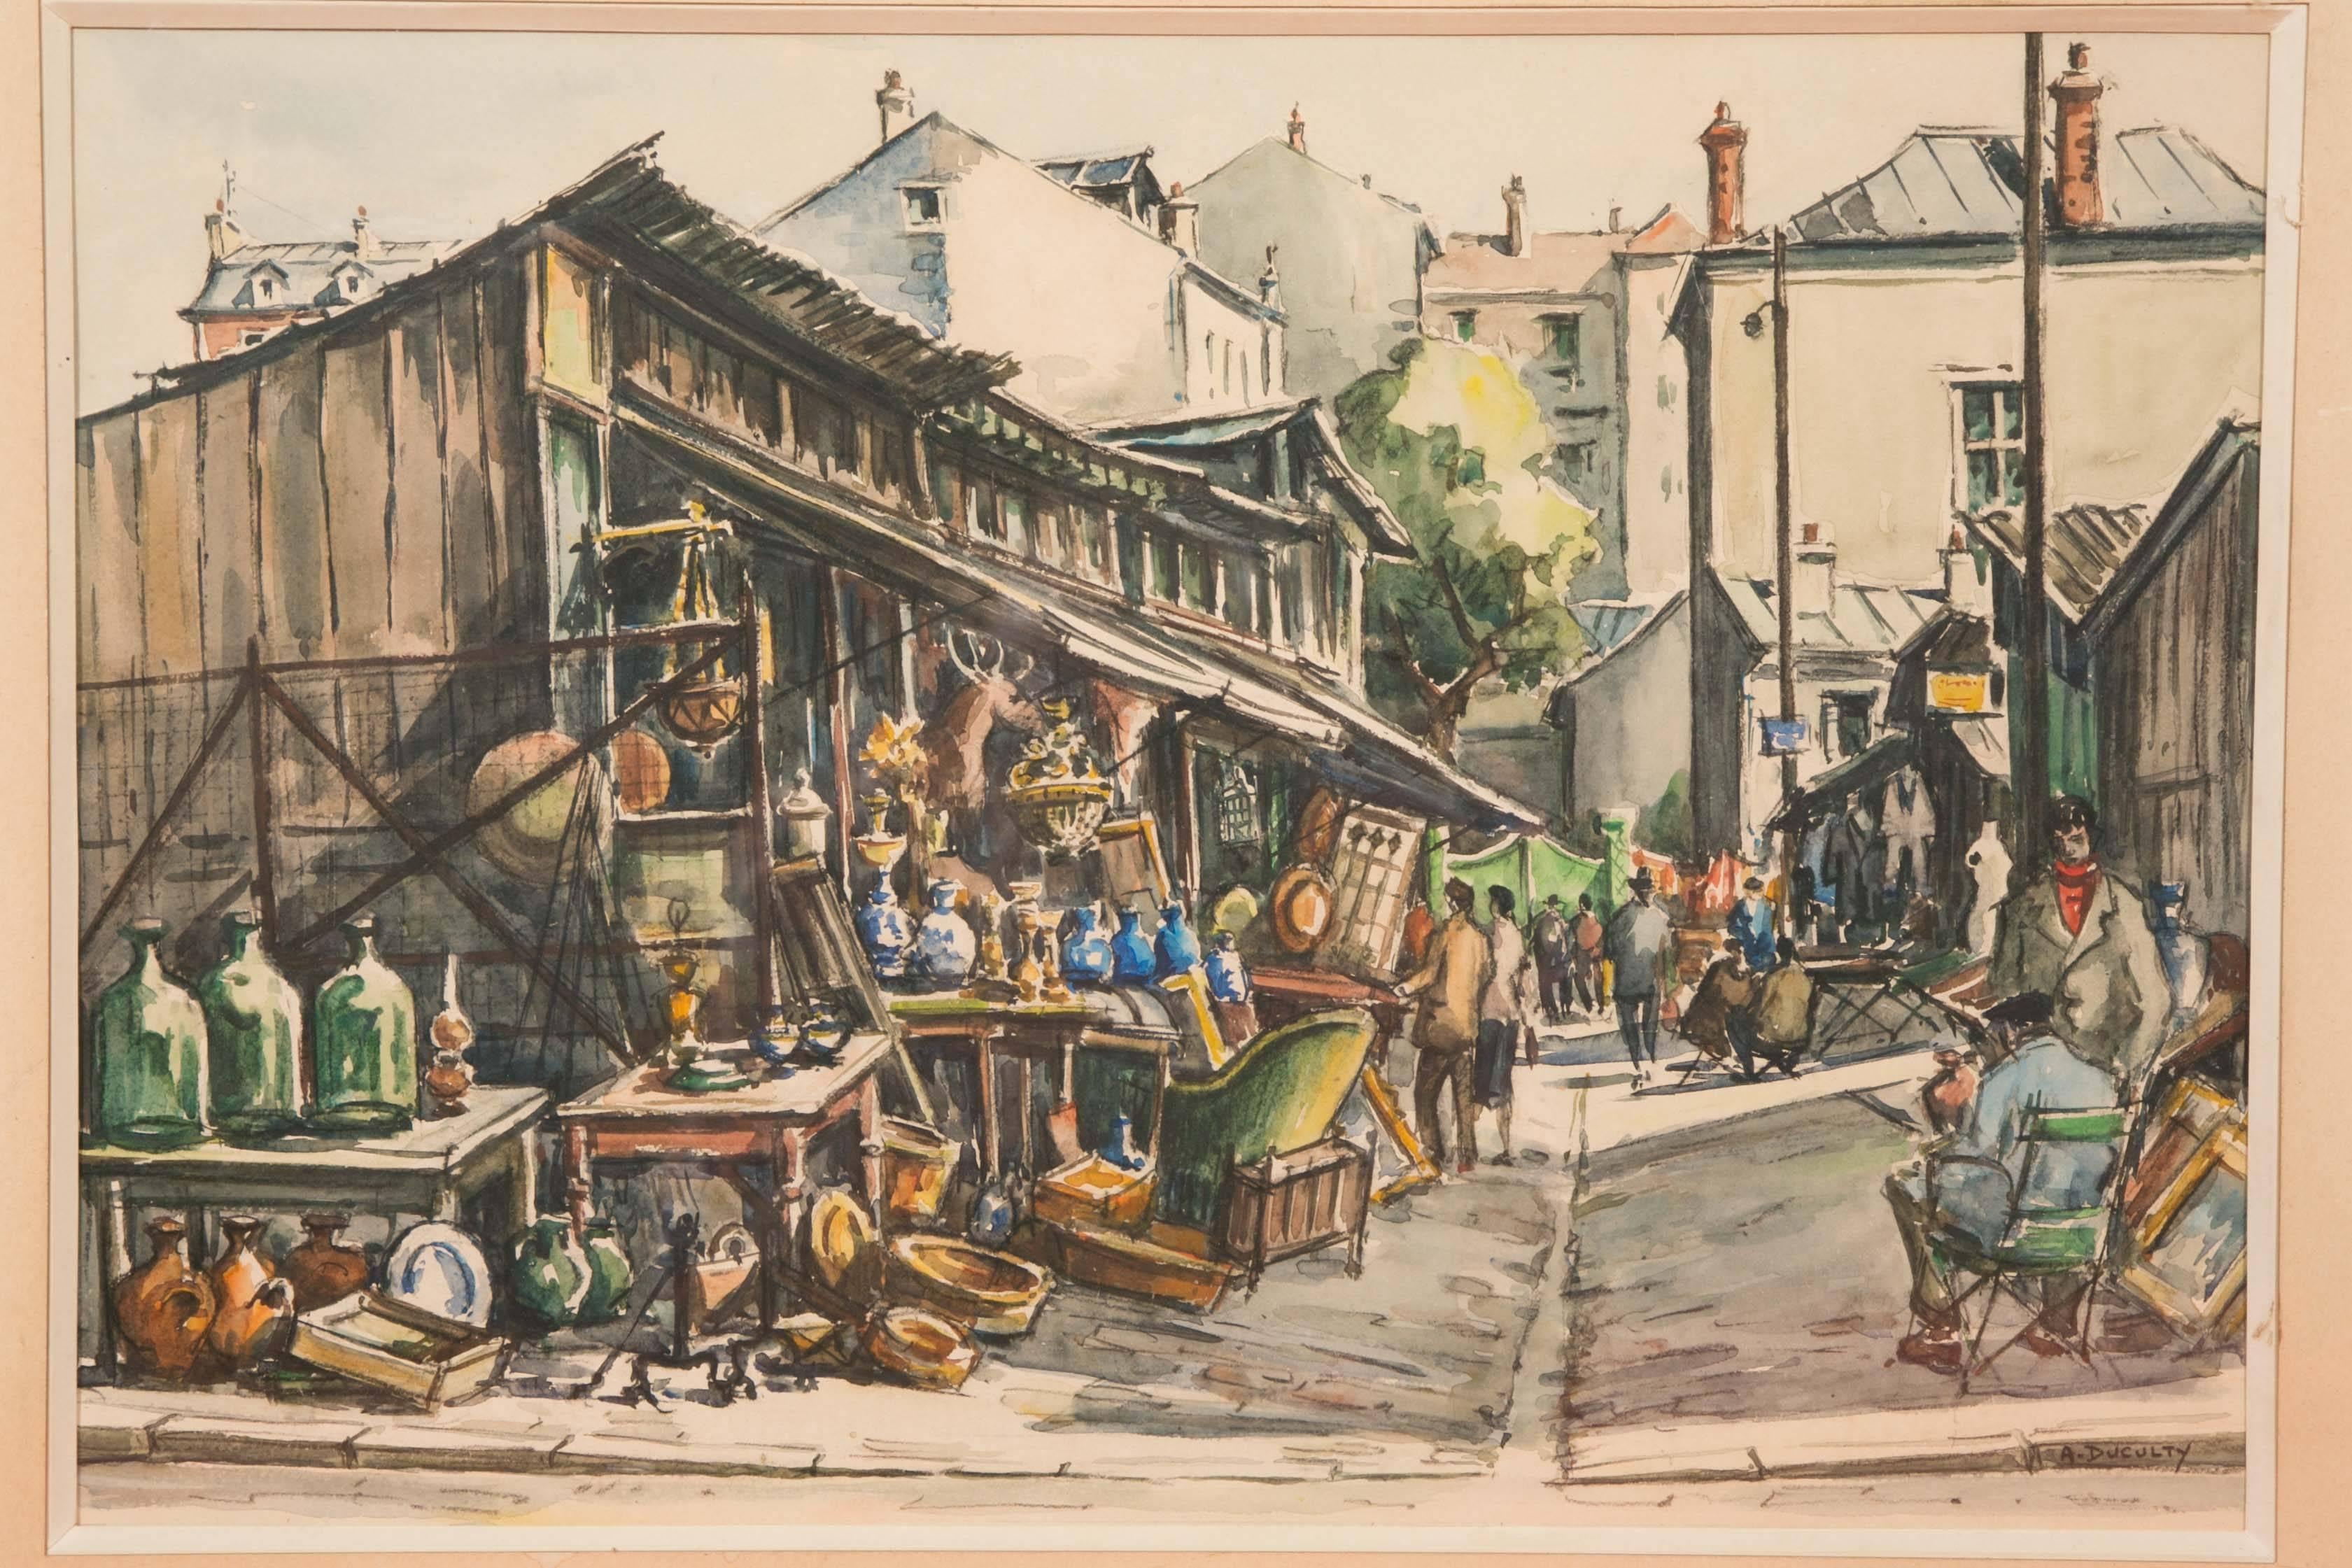 André Duculty (1912-1990) benefits from a solid training in drawing thanks to his father whos is an engraver. He completes his formation in the workshop of Fernand Léger. Despite his talent, he quickly abandons painting to devote himself quasi